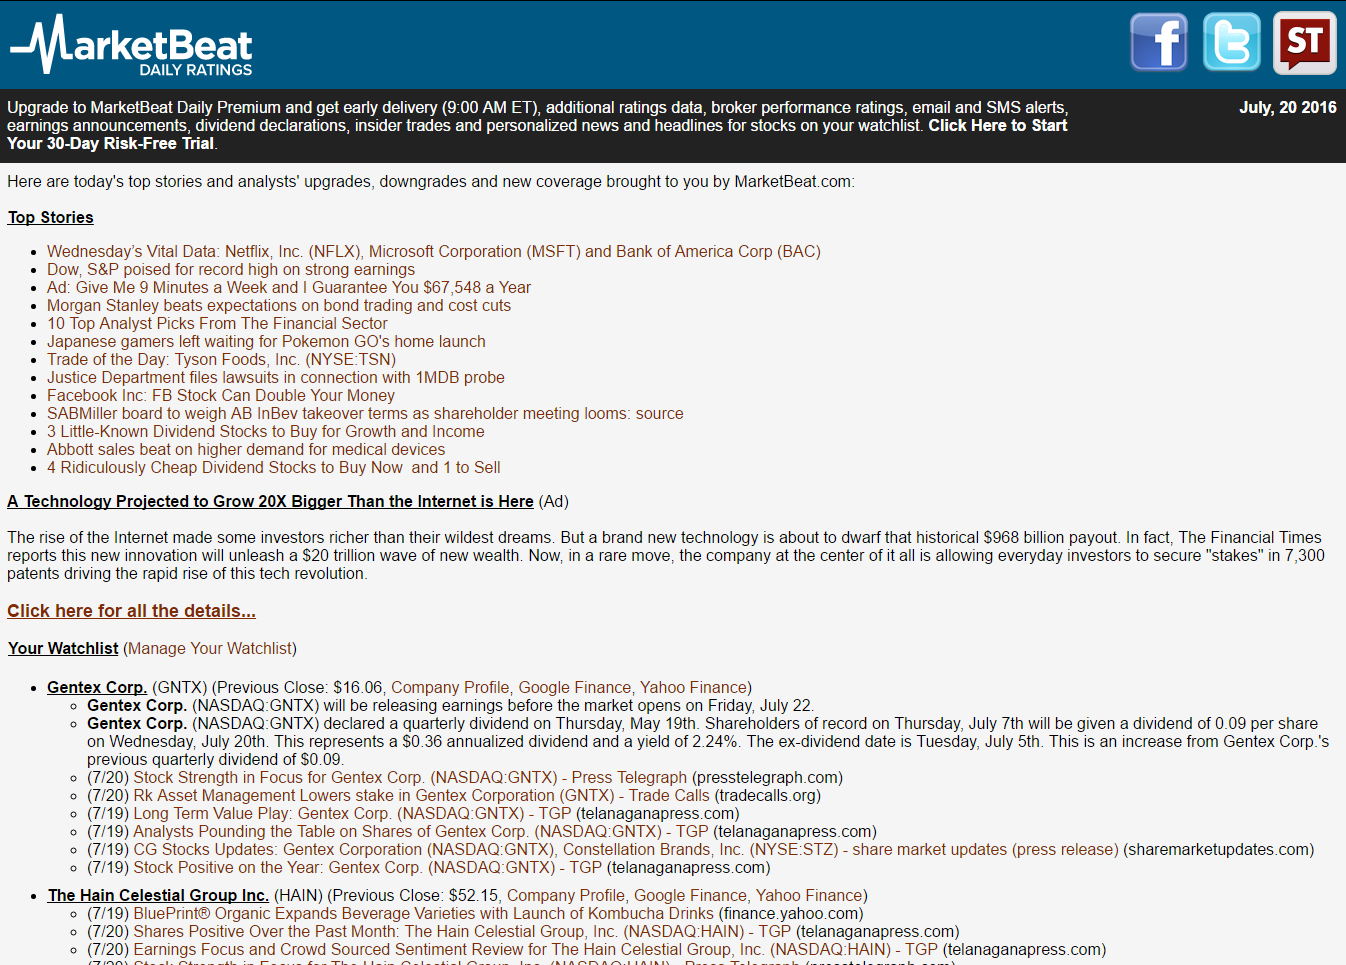 Receive more than 200 research updates daily by subscribing to MarketBeat Daily using the form below.